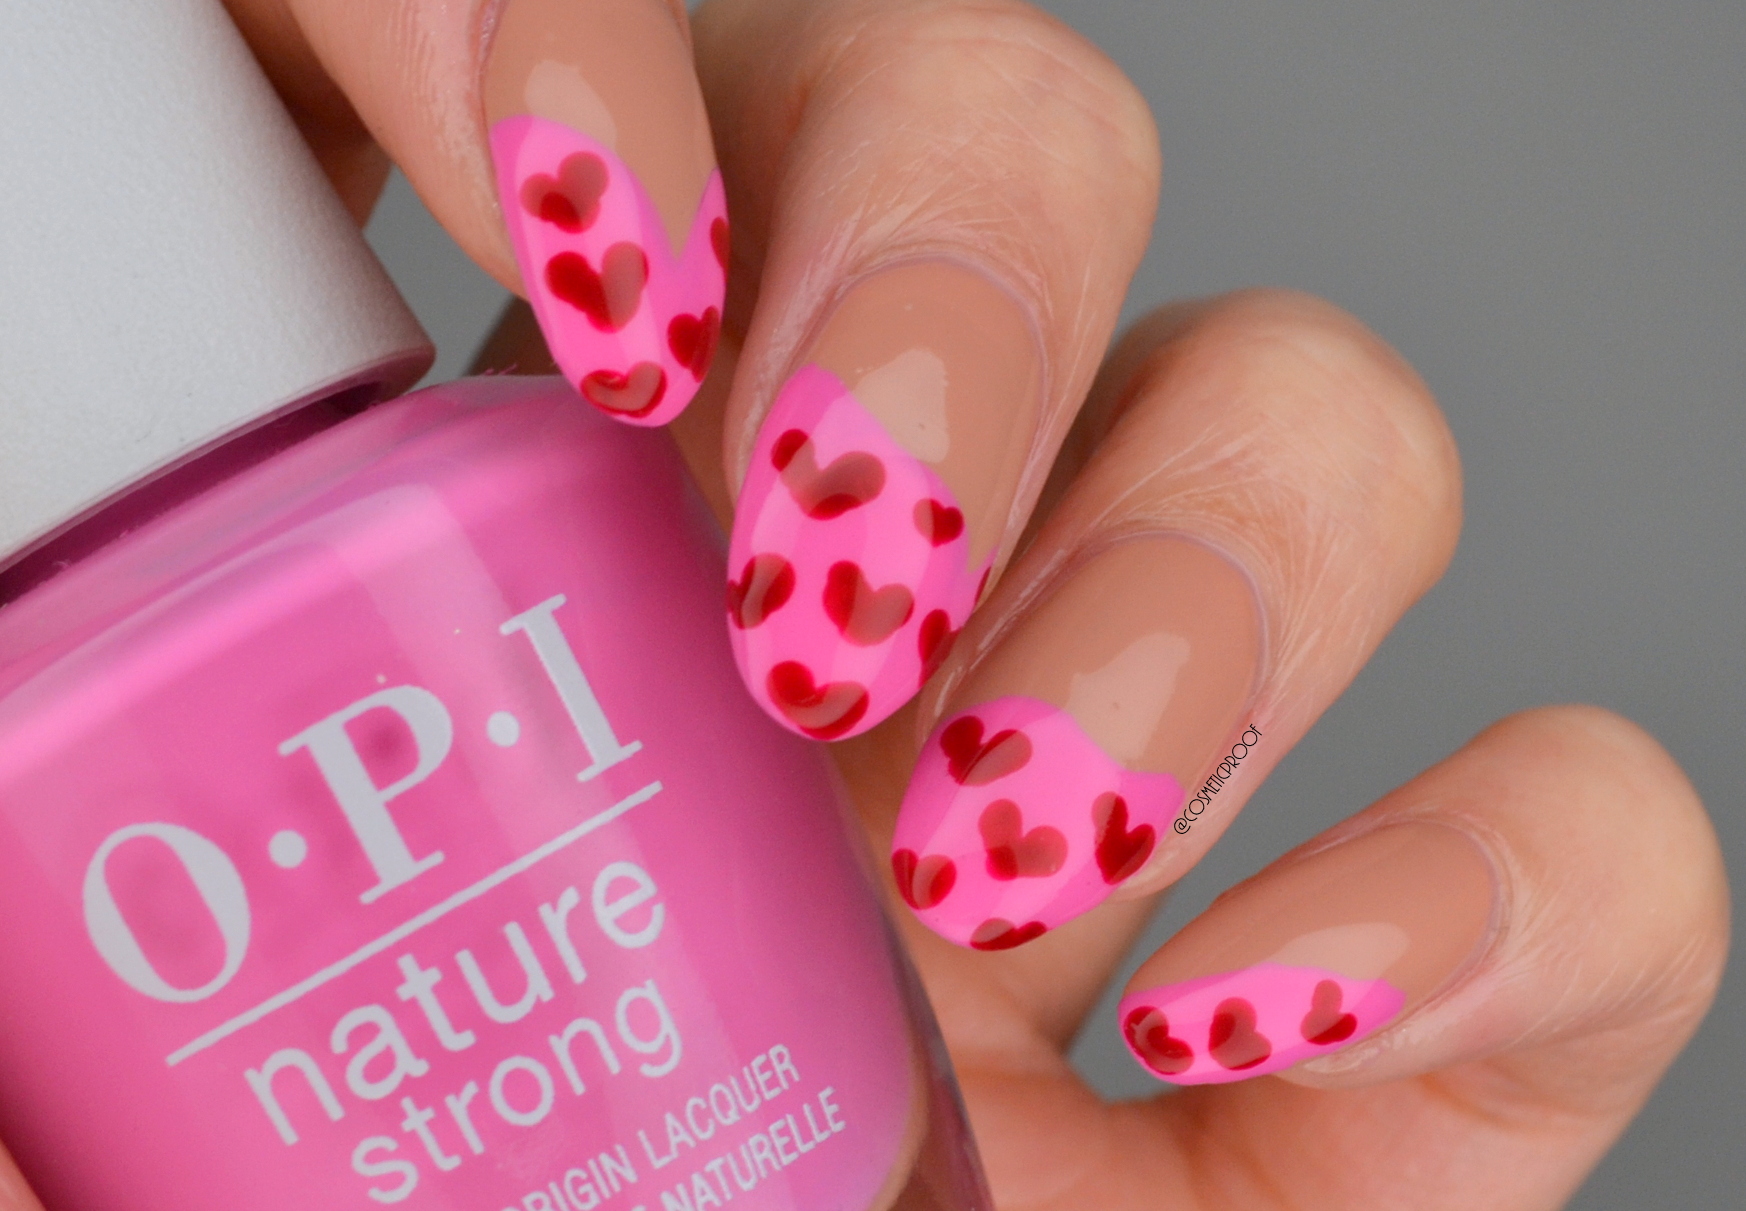 4. Pink and White Heart Nail Art - wide 3